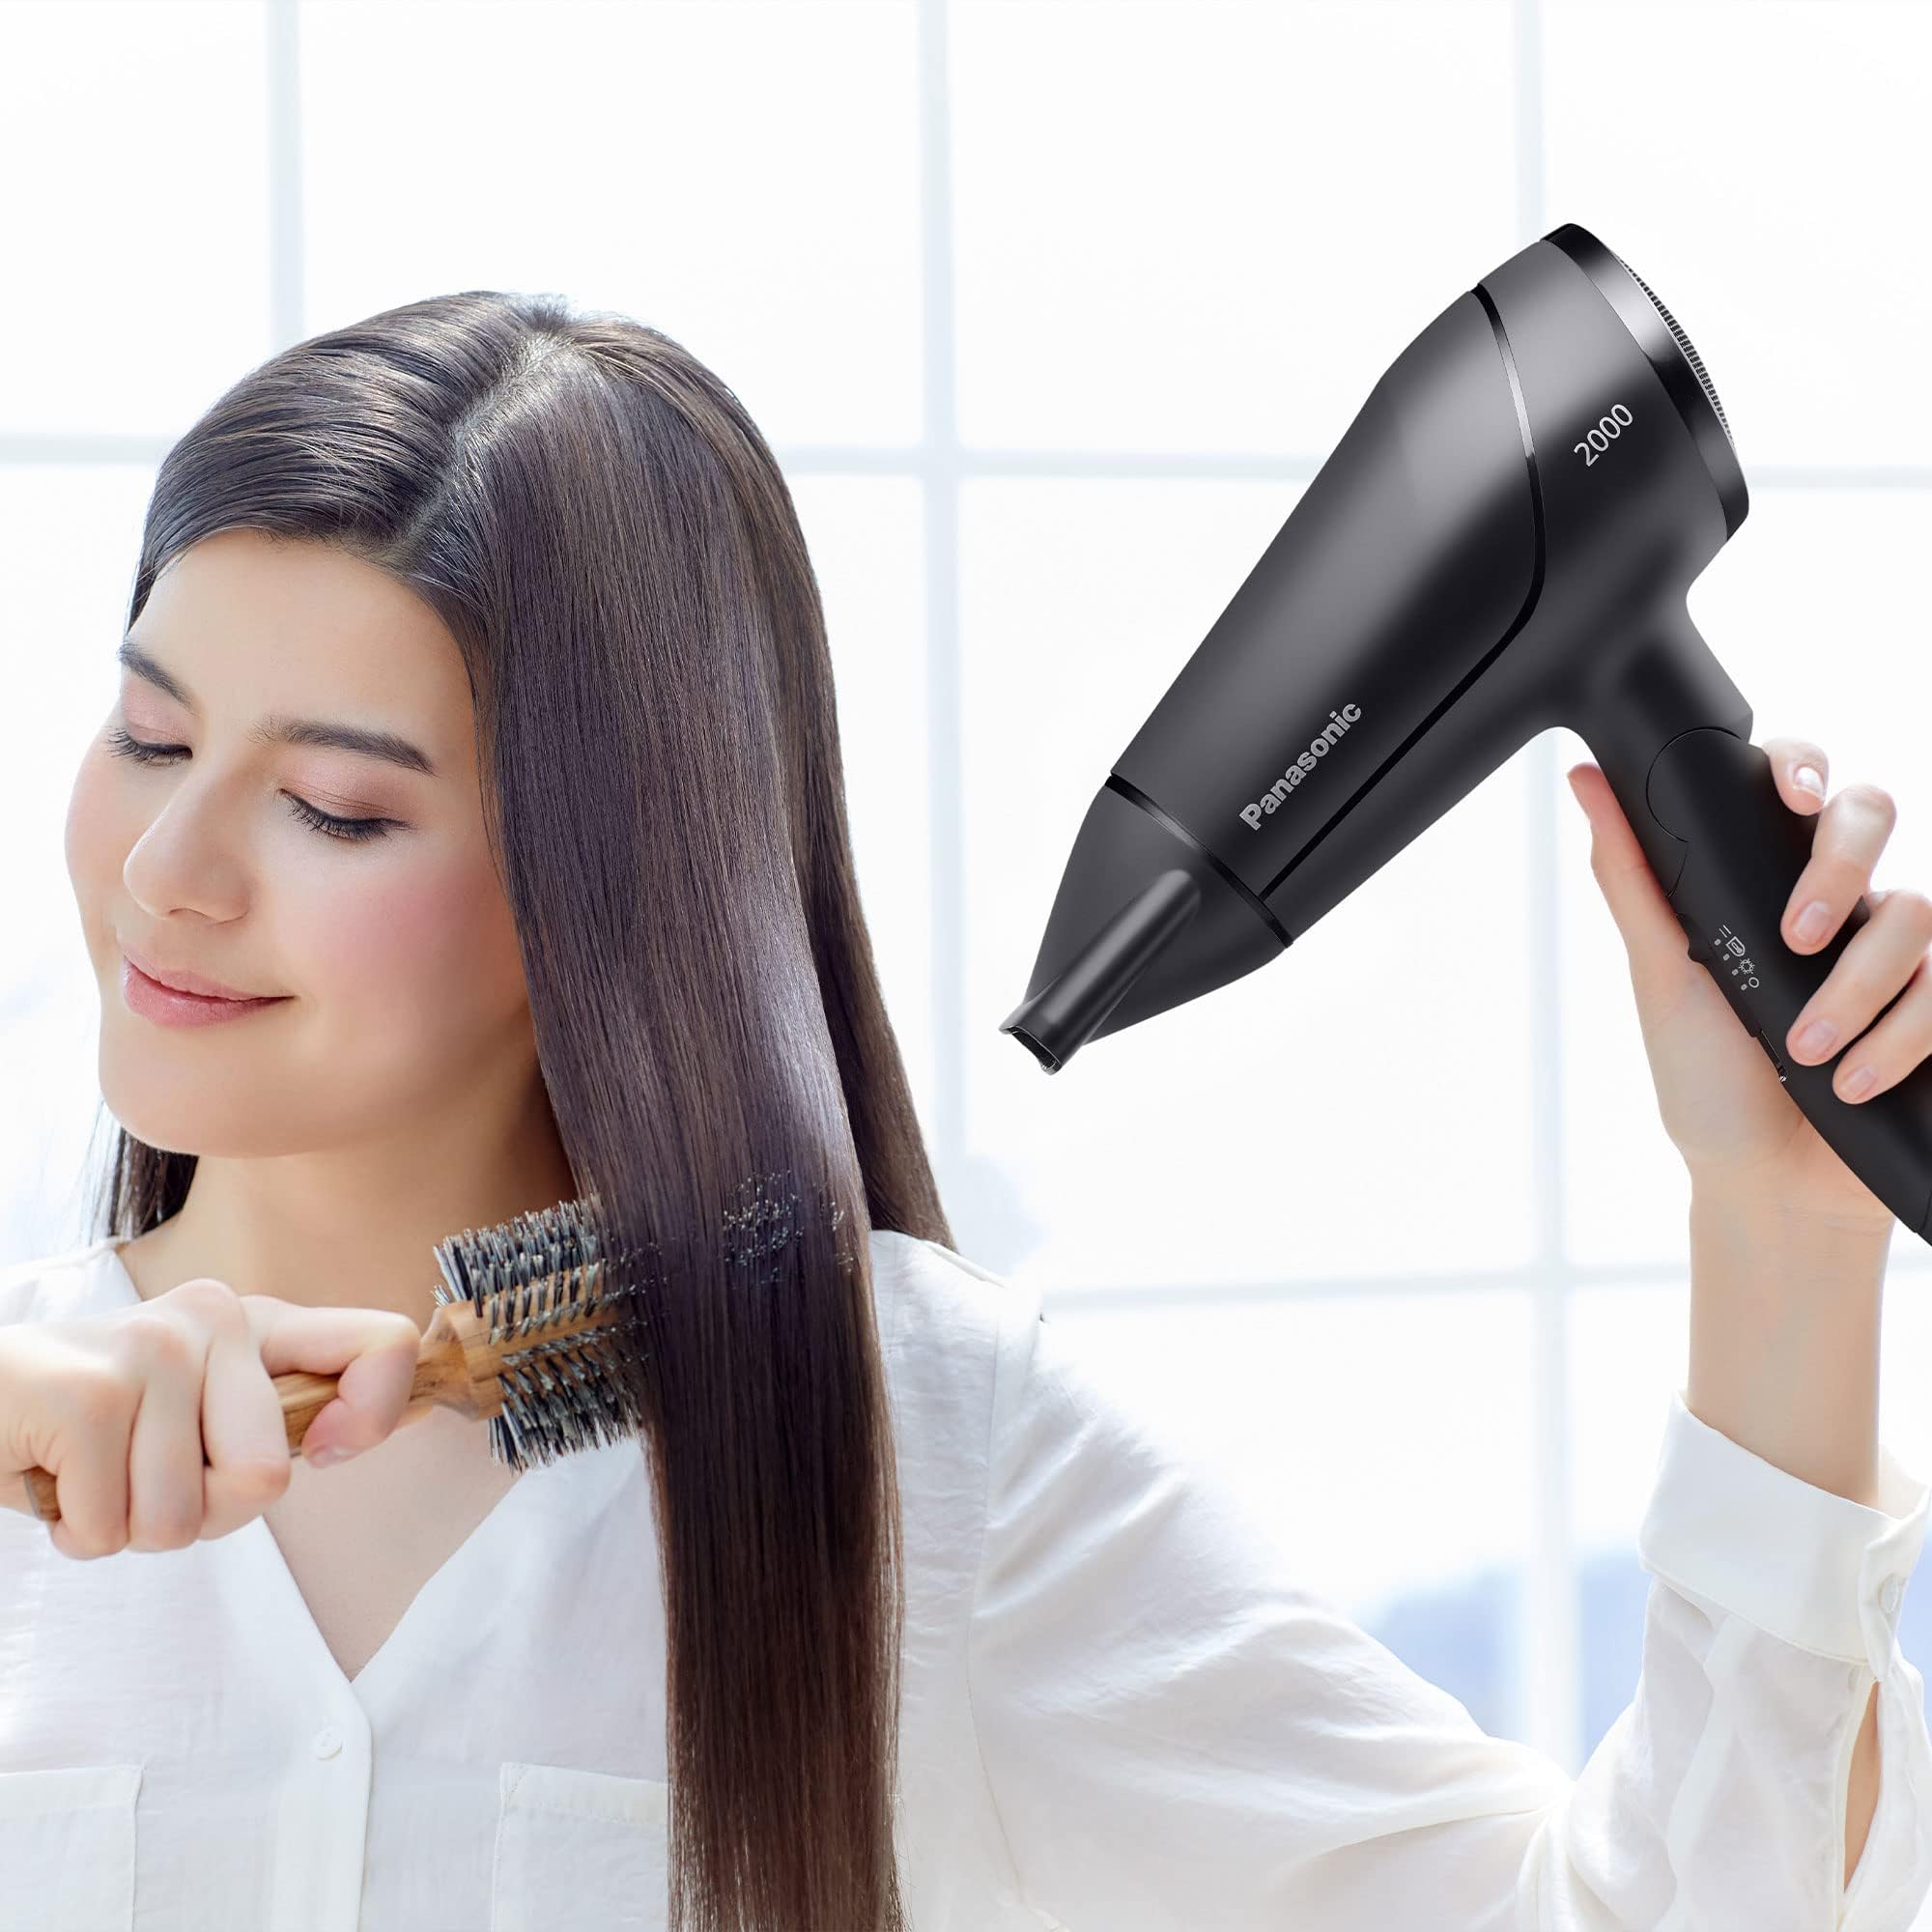 Panasonic 2000W Compact Powerful Hair Dryer with 11mm concentrator nozzle for Fast Drying & Smooth Finish (OPEN-BOX)